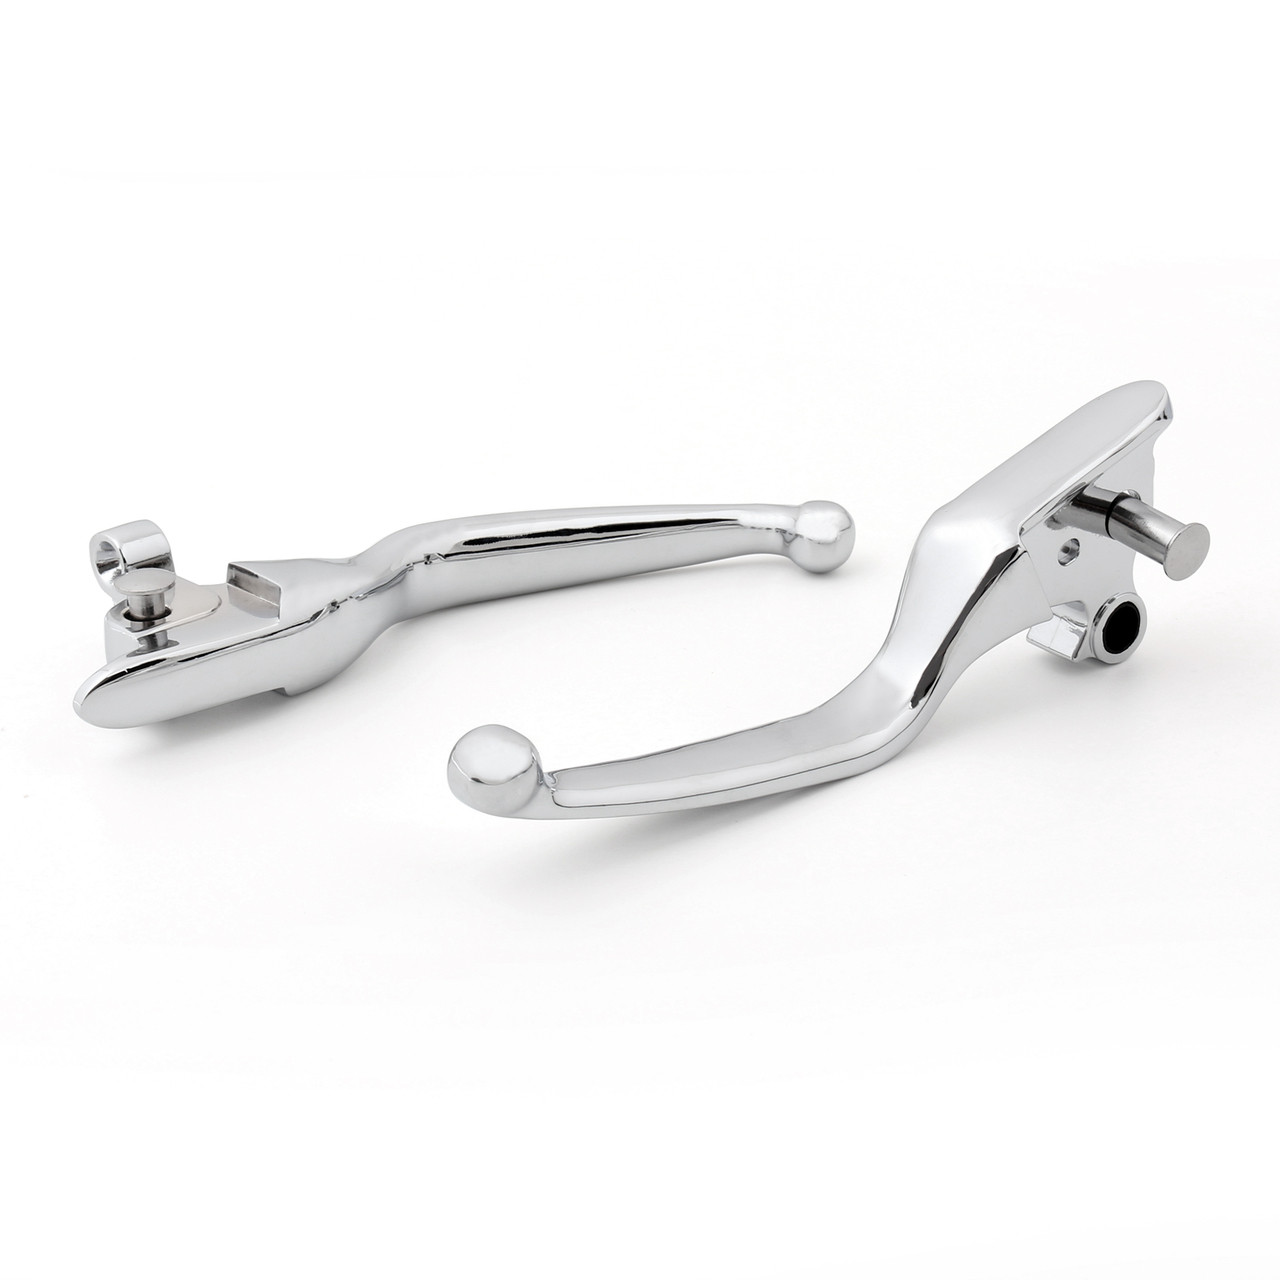 Brake Clutch Levers Harley Road King Classic FLHRC (2008-2013)Chrome